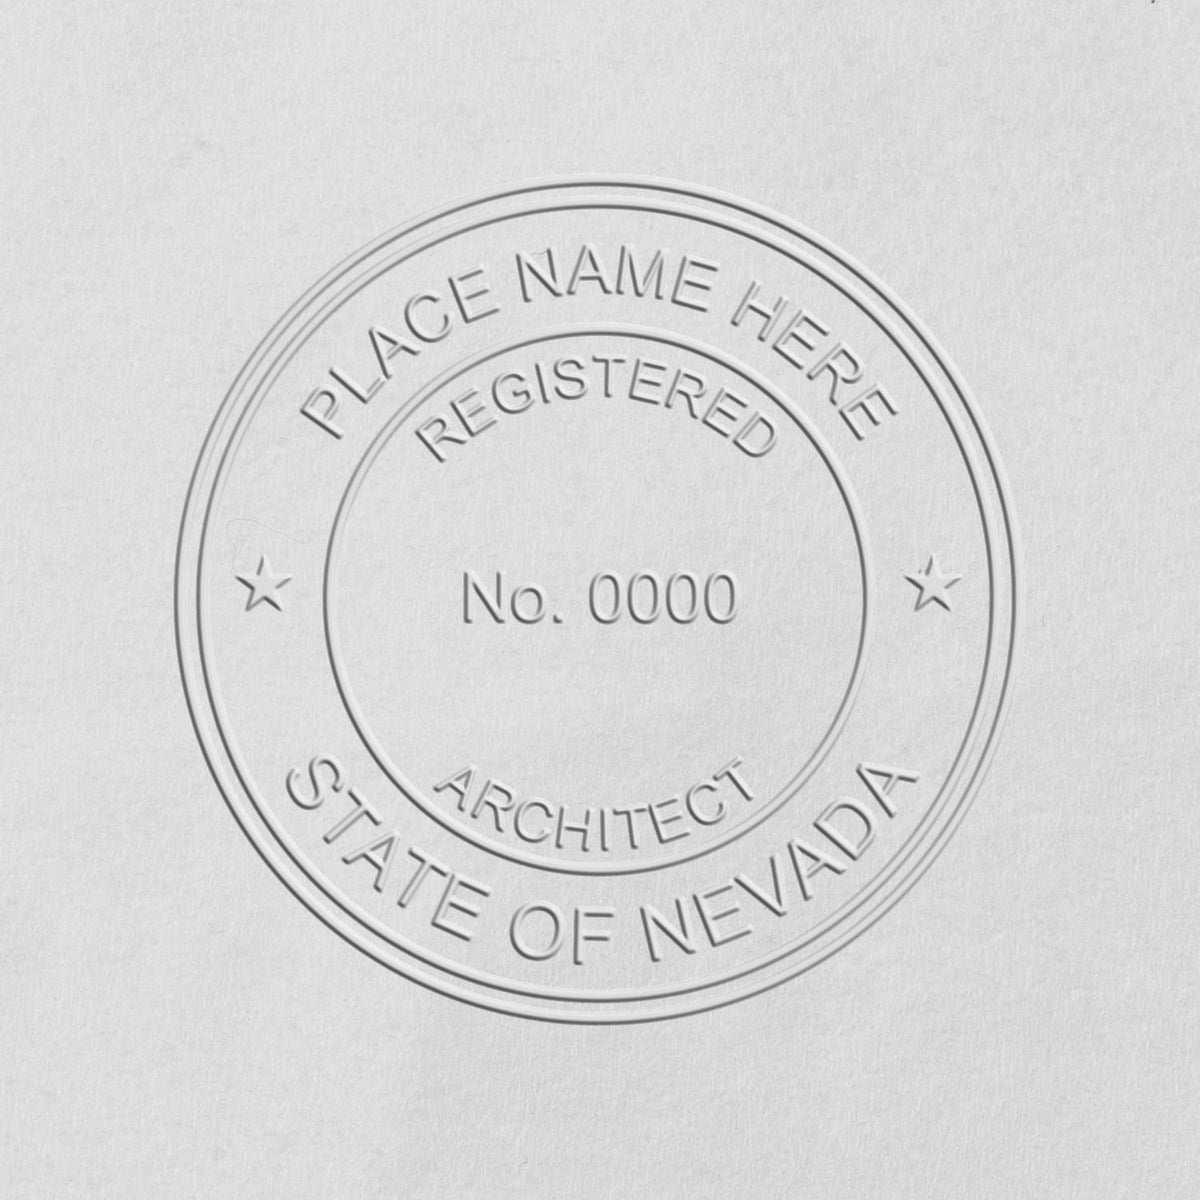 Extended Long Reach Nevada Architect Seal Embosser in use photo showing a stamped imprint of the Extended Long Reach Nevada Architect Seal Embosser